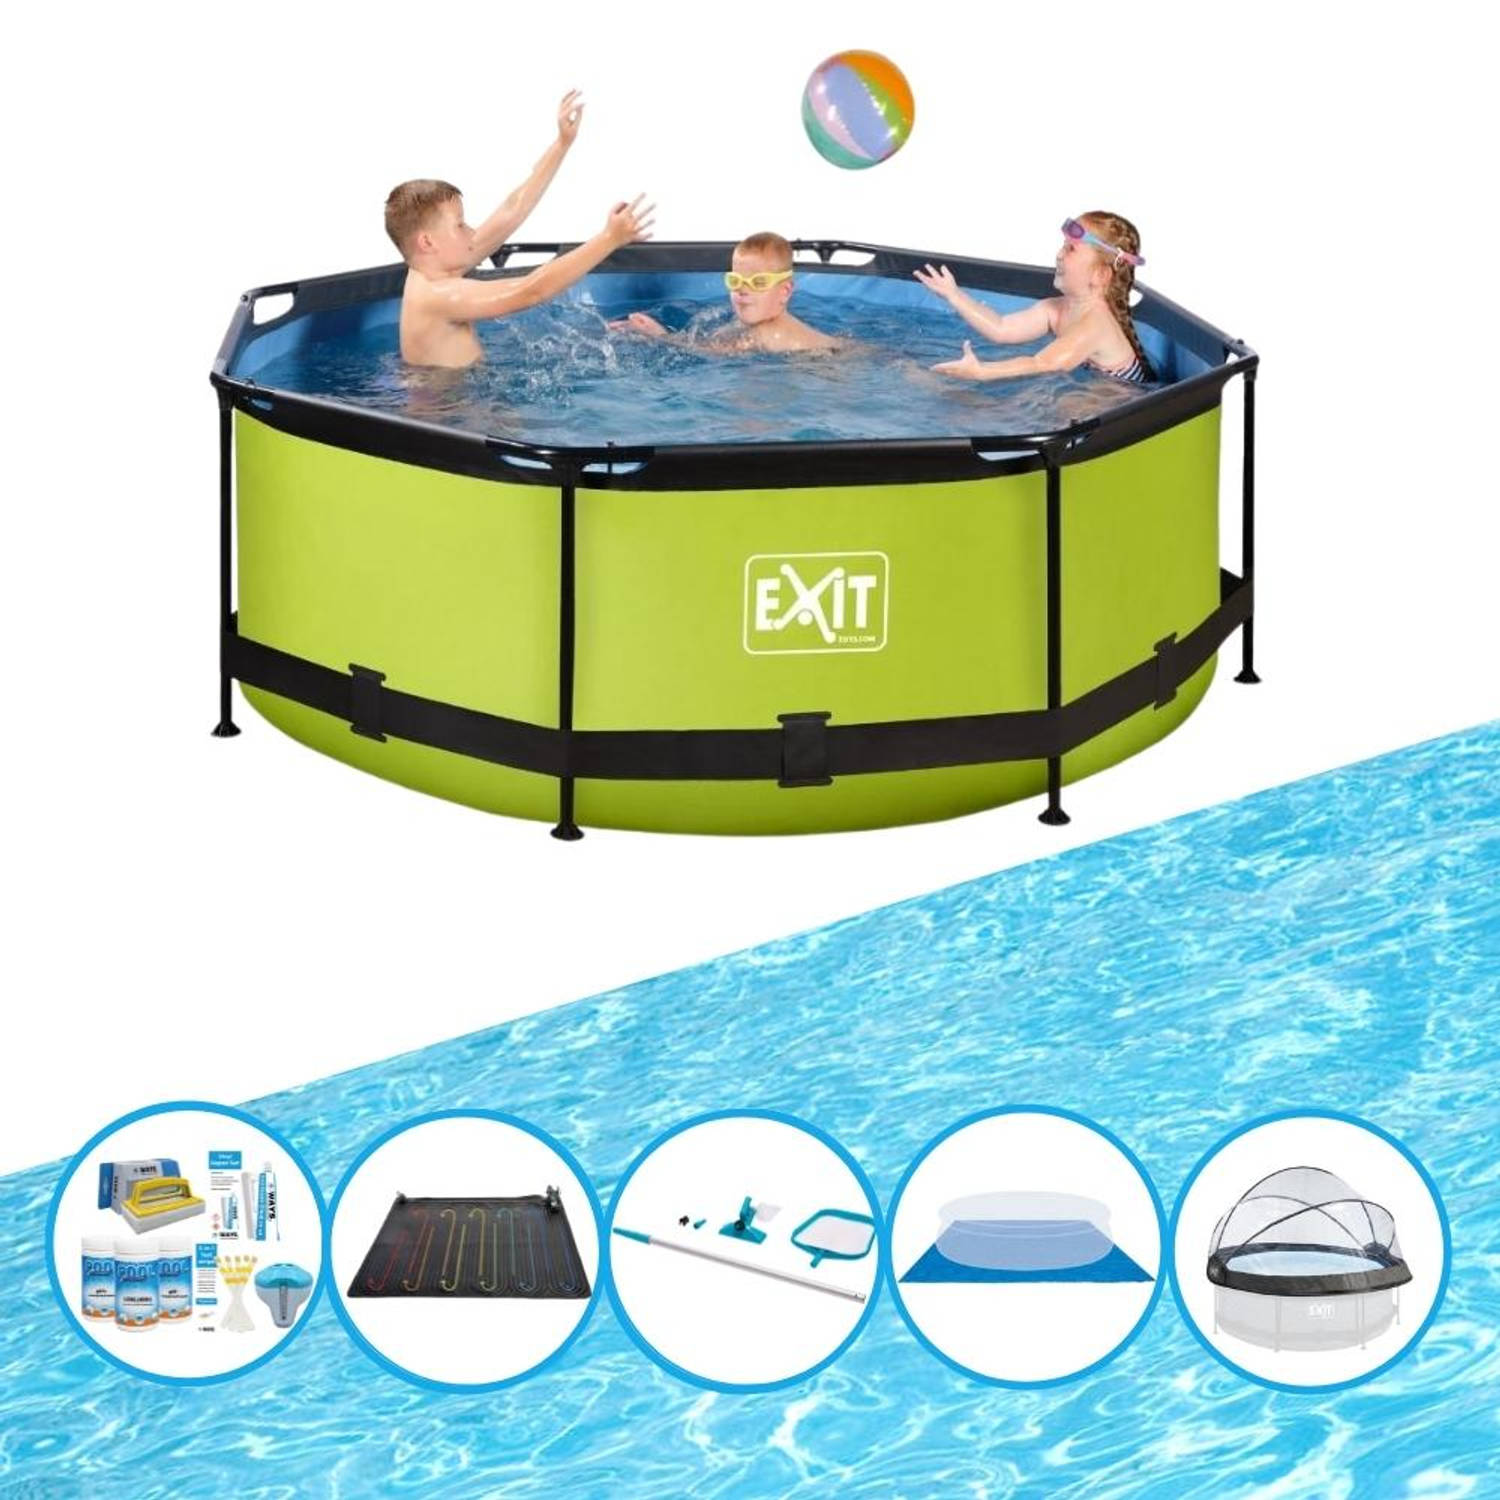 EXIT Toys Exit Zwembad Lime - ø244x76 Cm - Frame Pool - Inclusief Accessoires - Groen